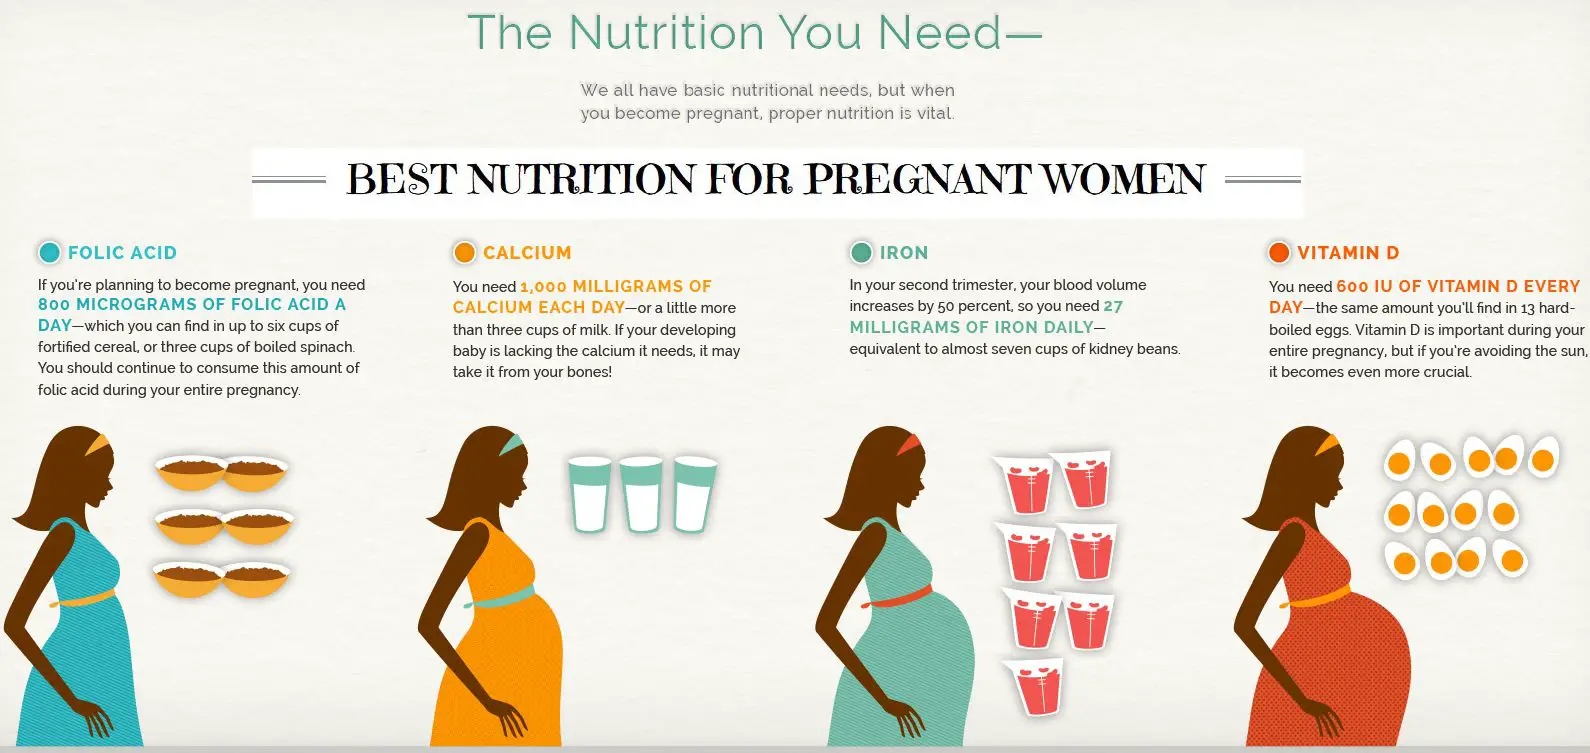 What Supplementation Do I Need during Pregnancy?